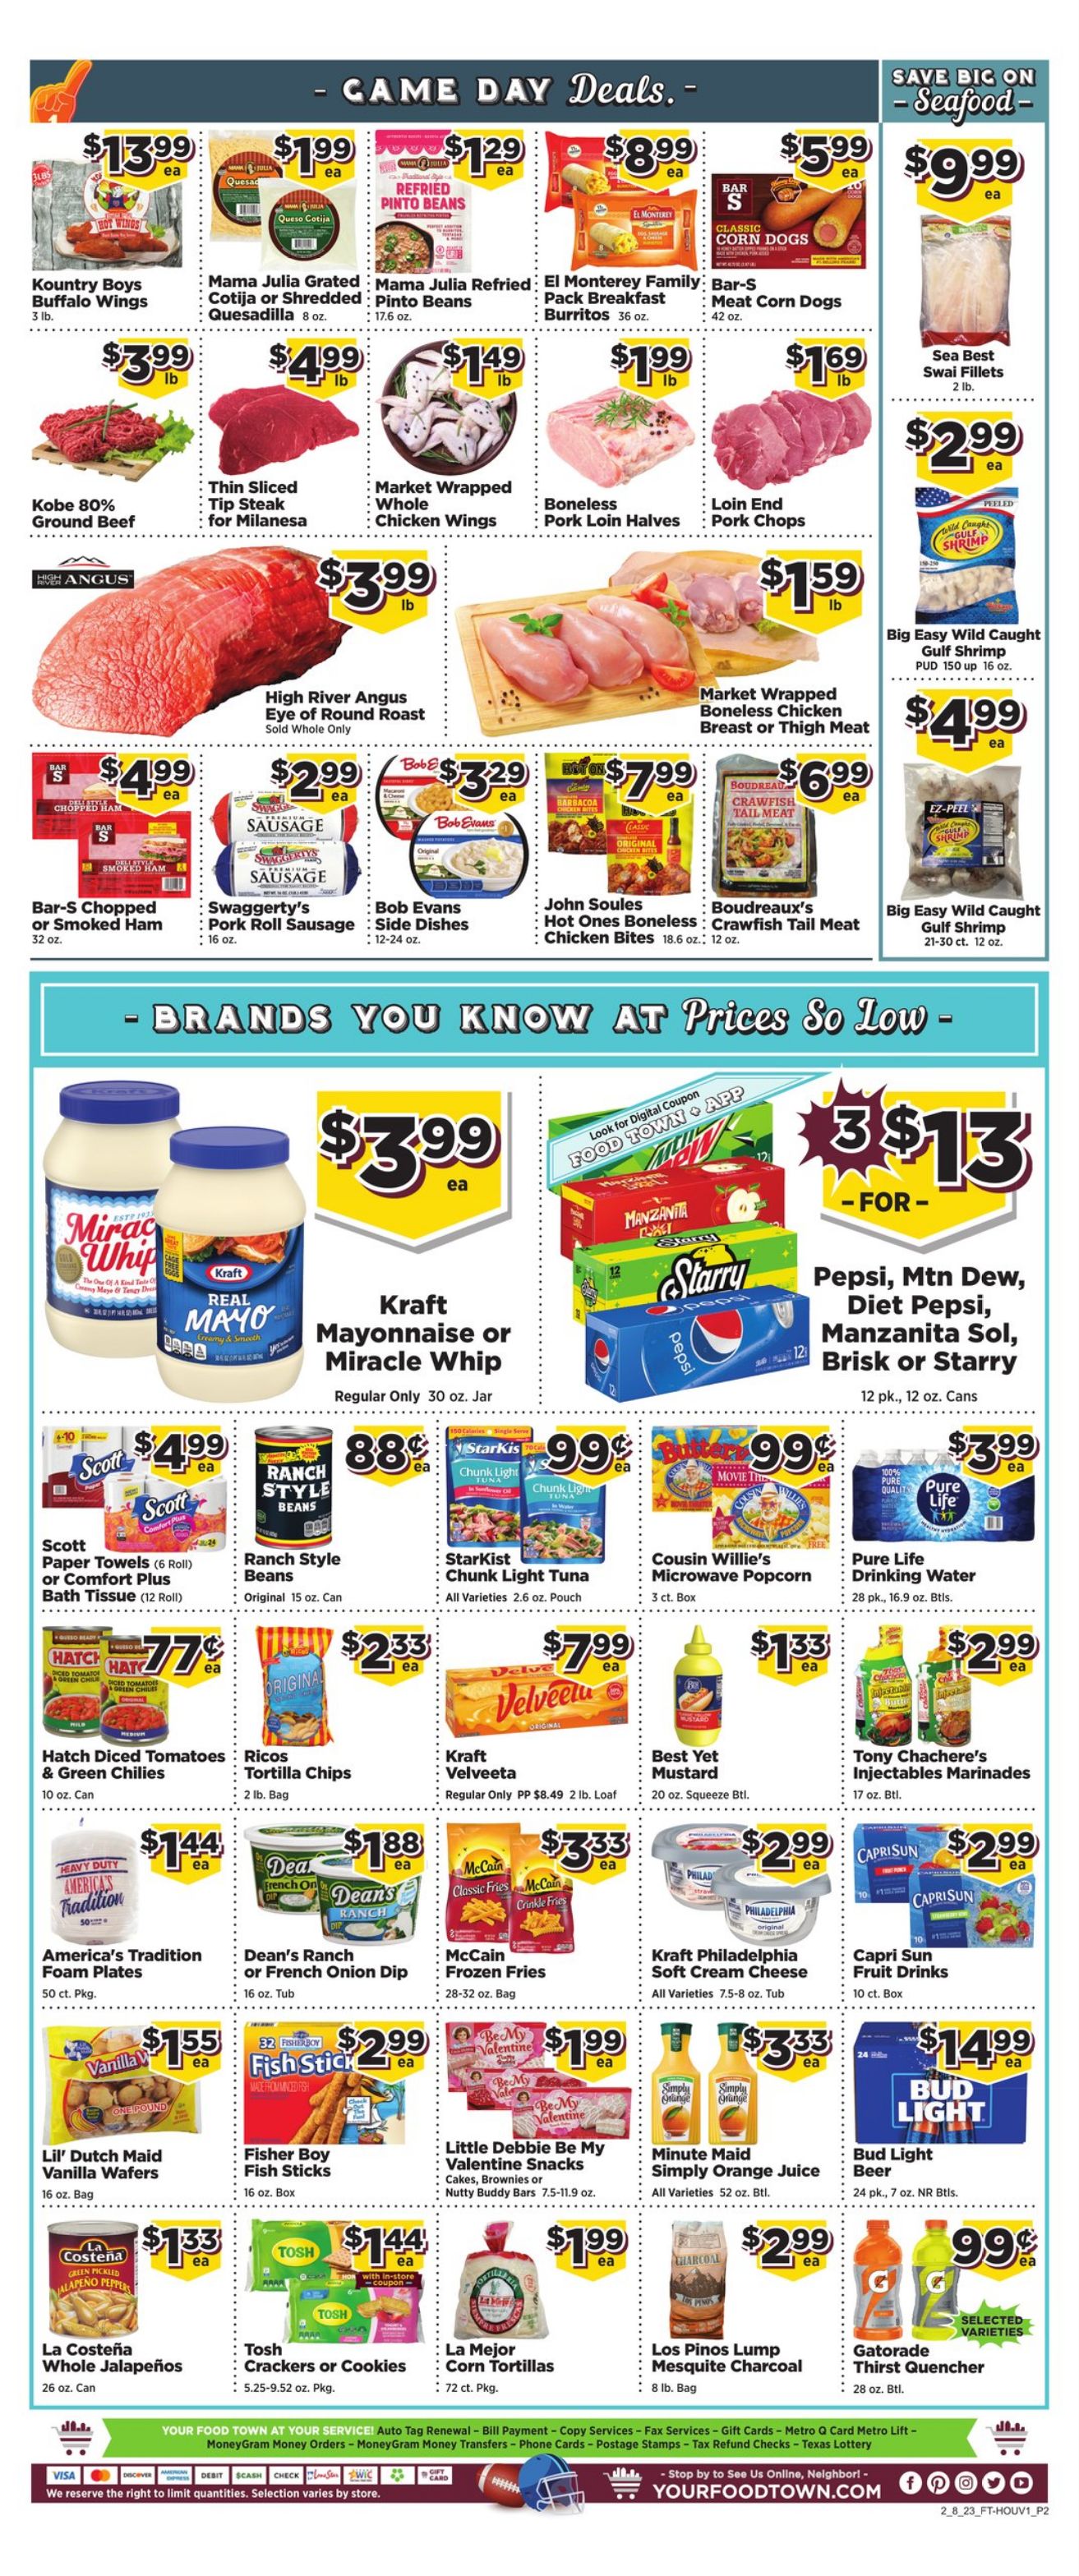 Weekly ad Your Food Town 02/08/2023 - 02/14/2023